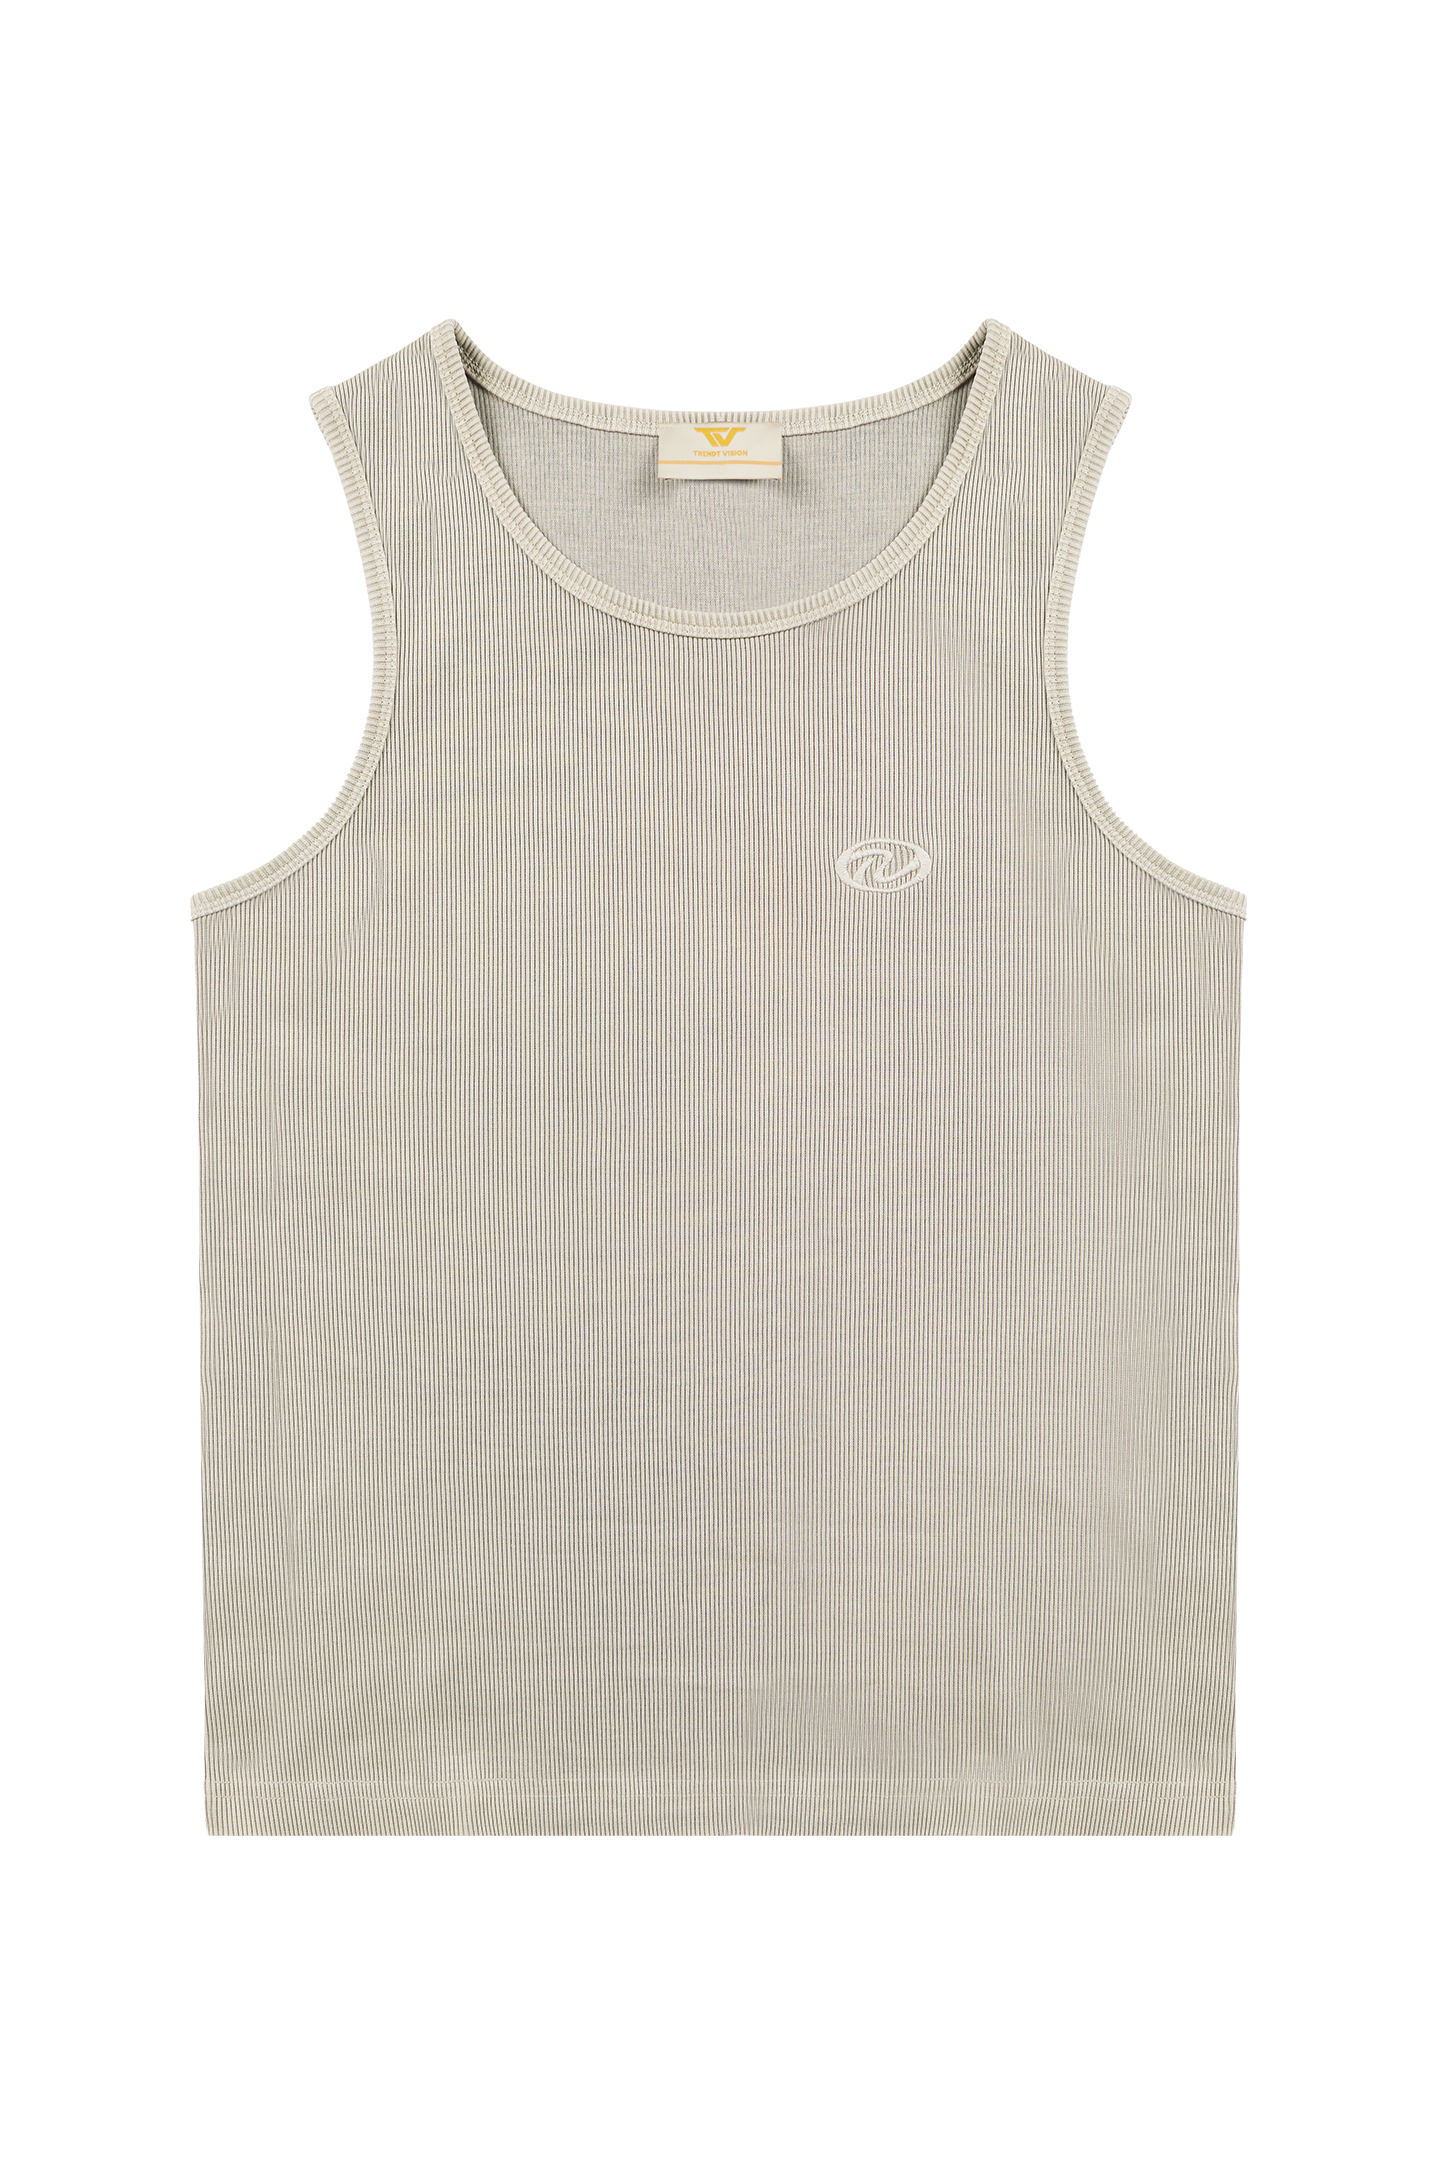 Vintage White "Echoes" Tank Top